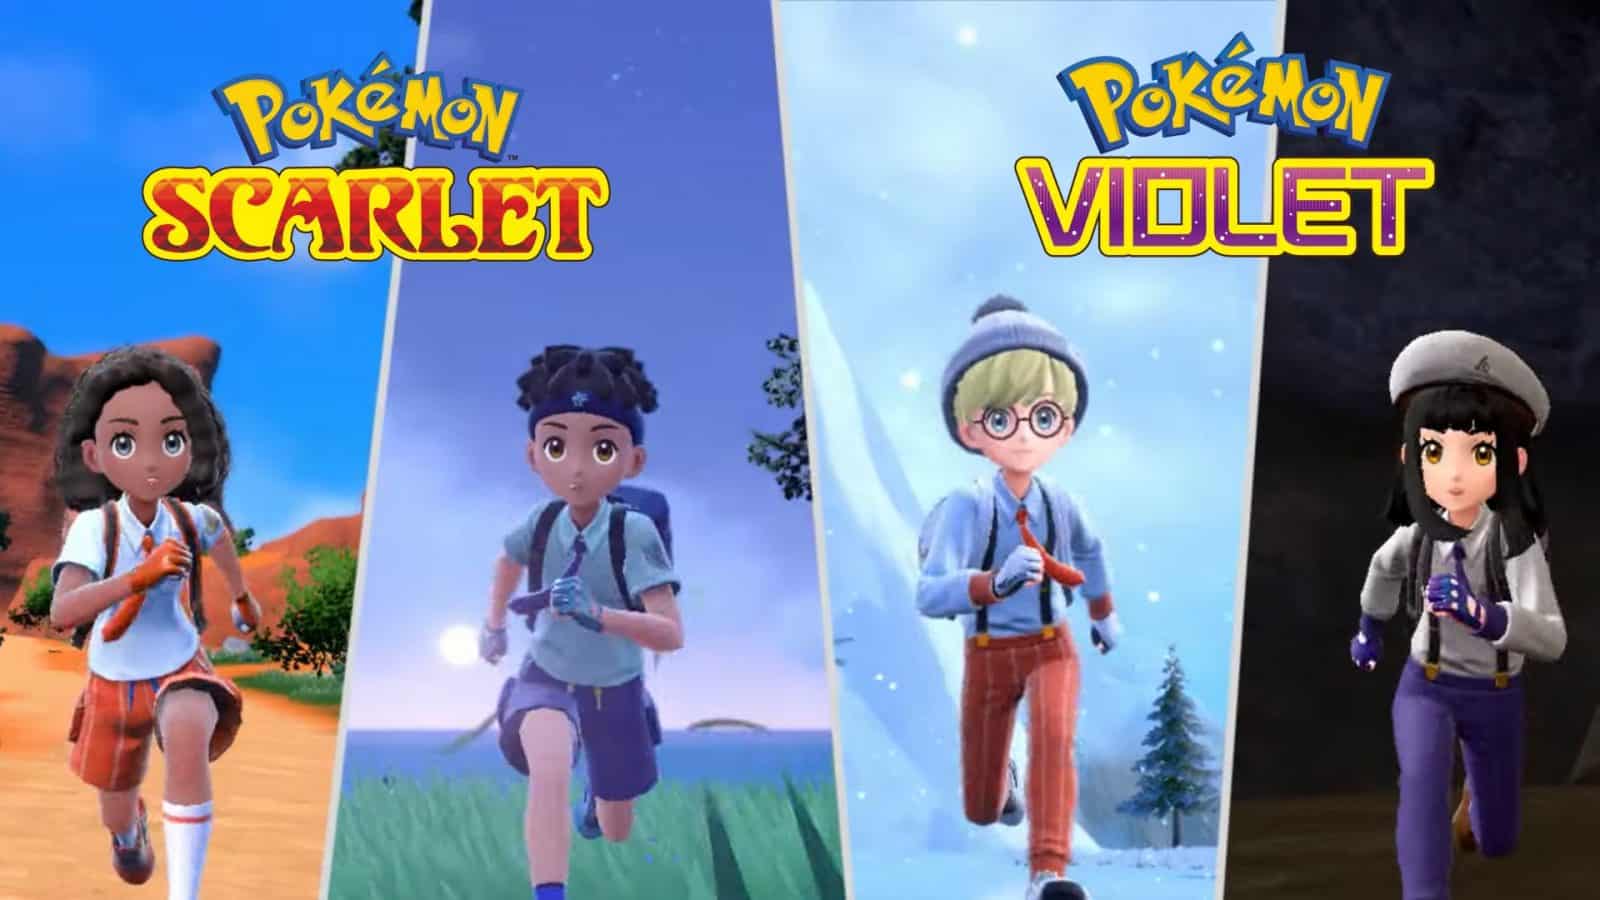 4 pokemon trainers running in pokemon scarlet and violet